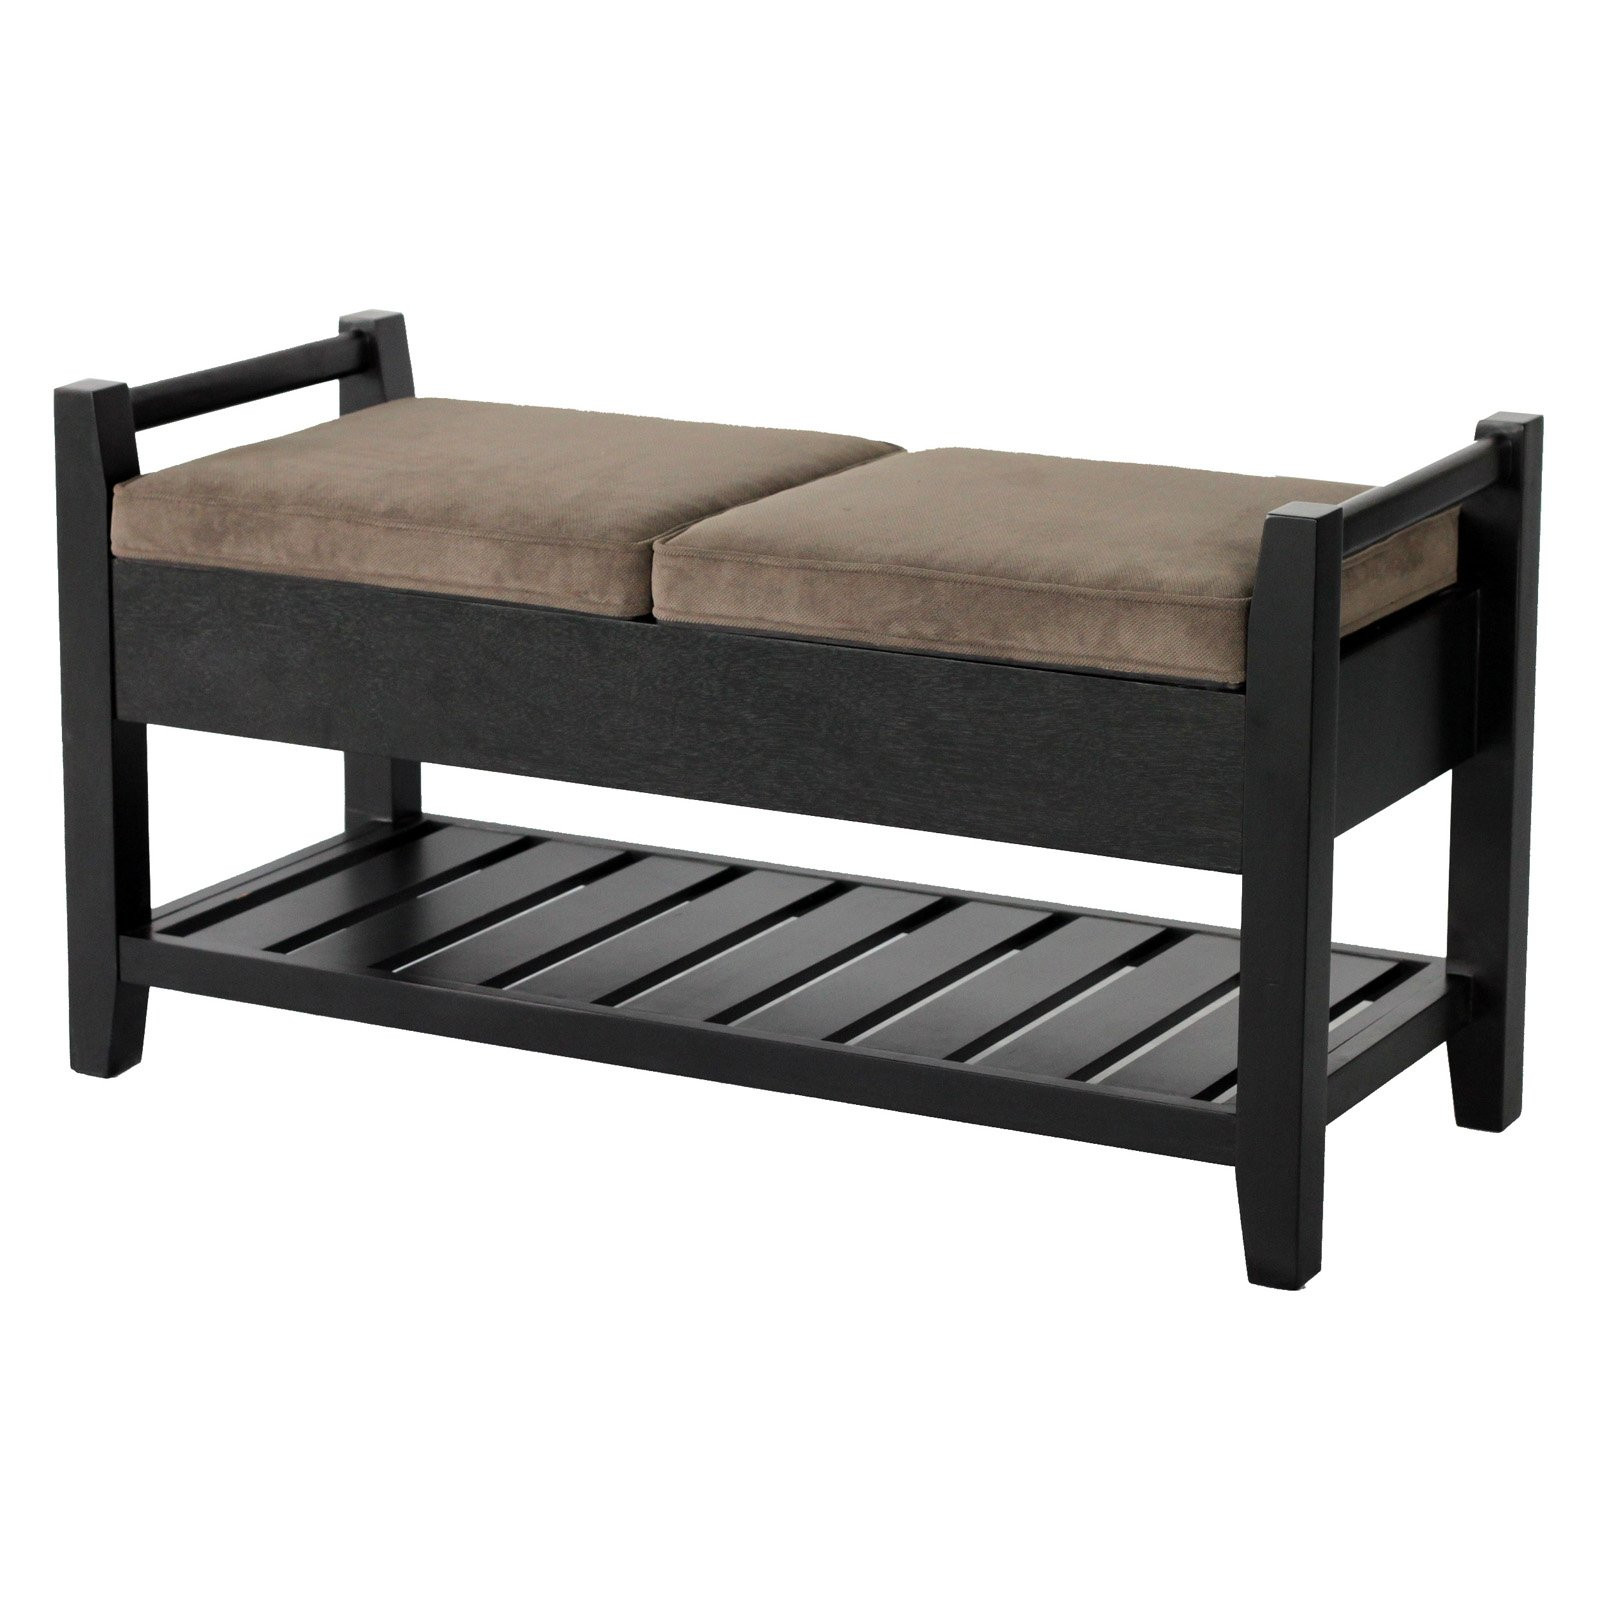 Padded Bench Seat With Storage
 Let’s Decorate Your Home with a Stunning Upholstered Bench